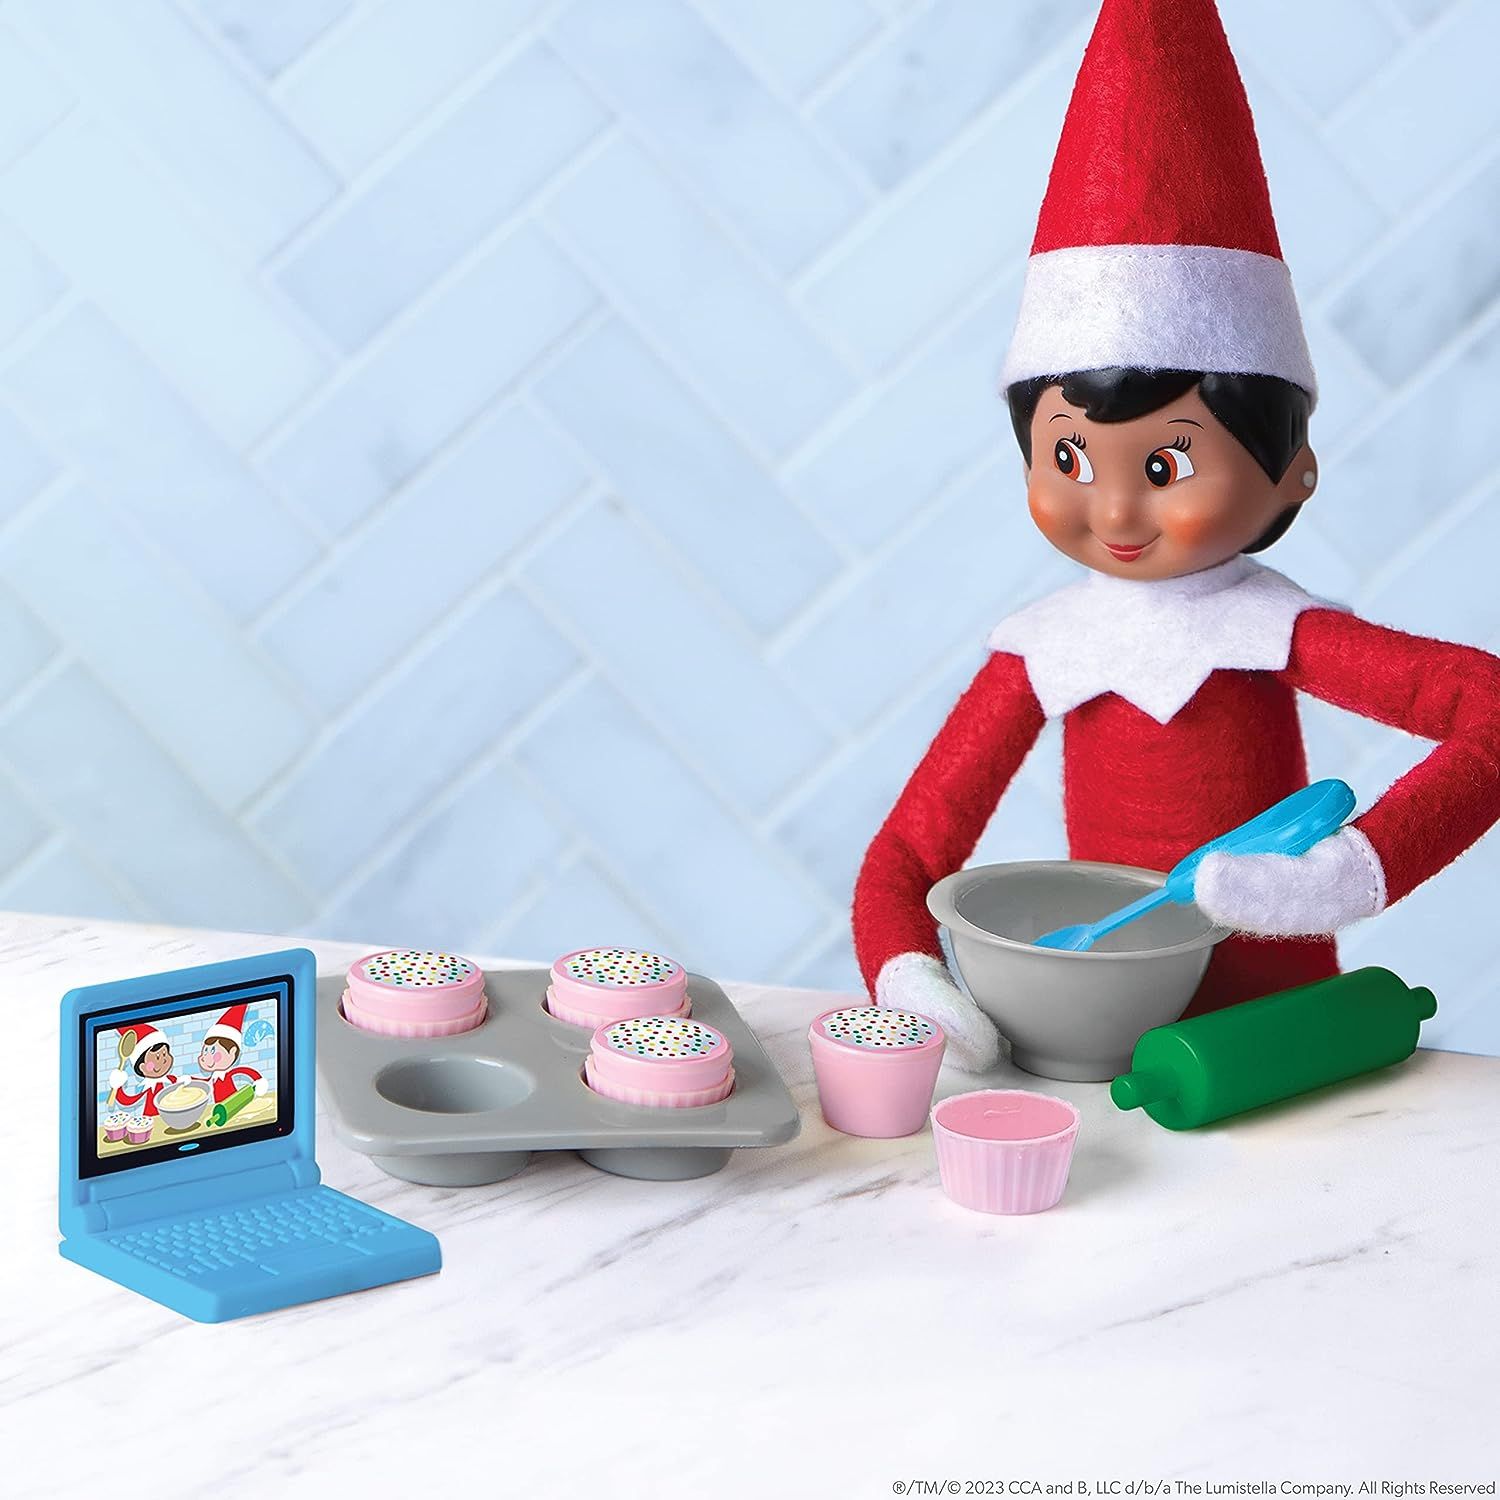 Easy Elf on the Shelf Ideas for Christmas Eve – SheKnows